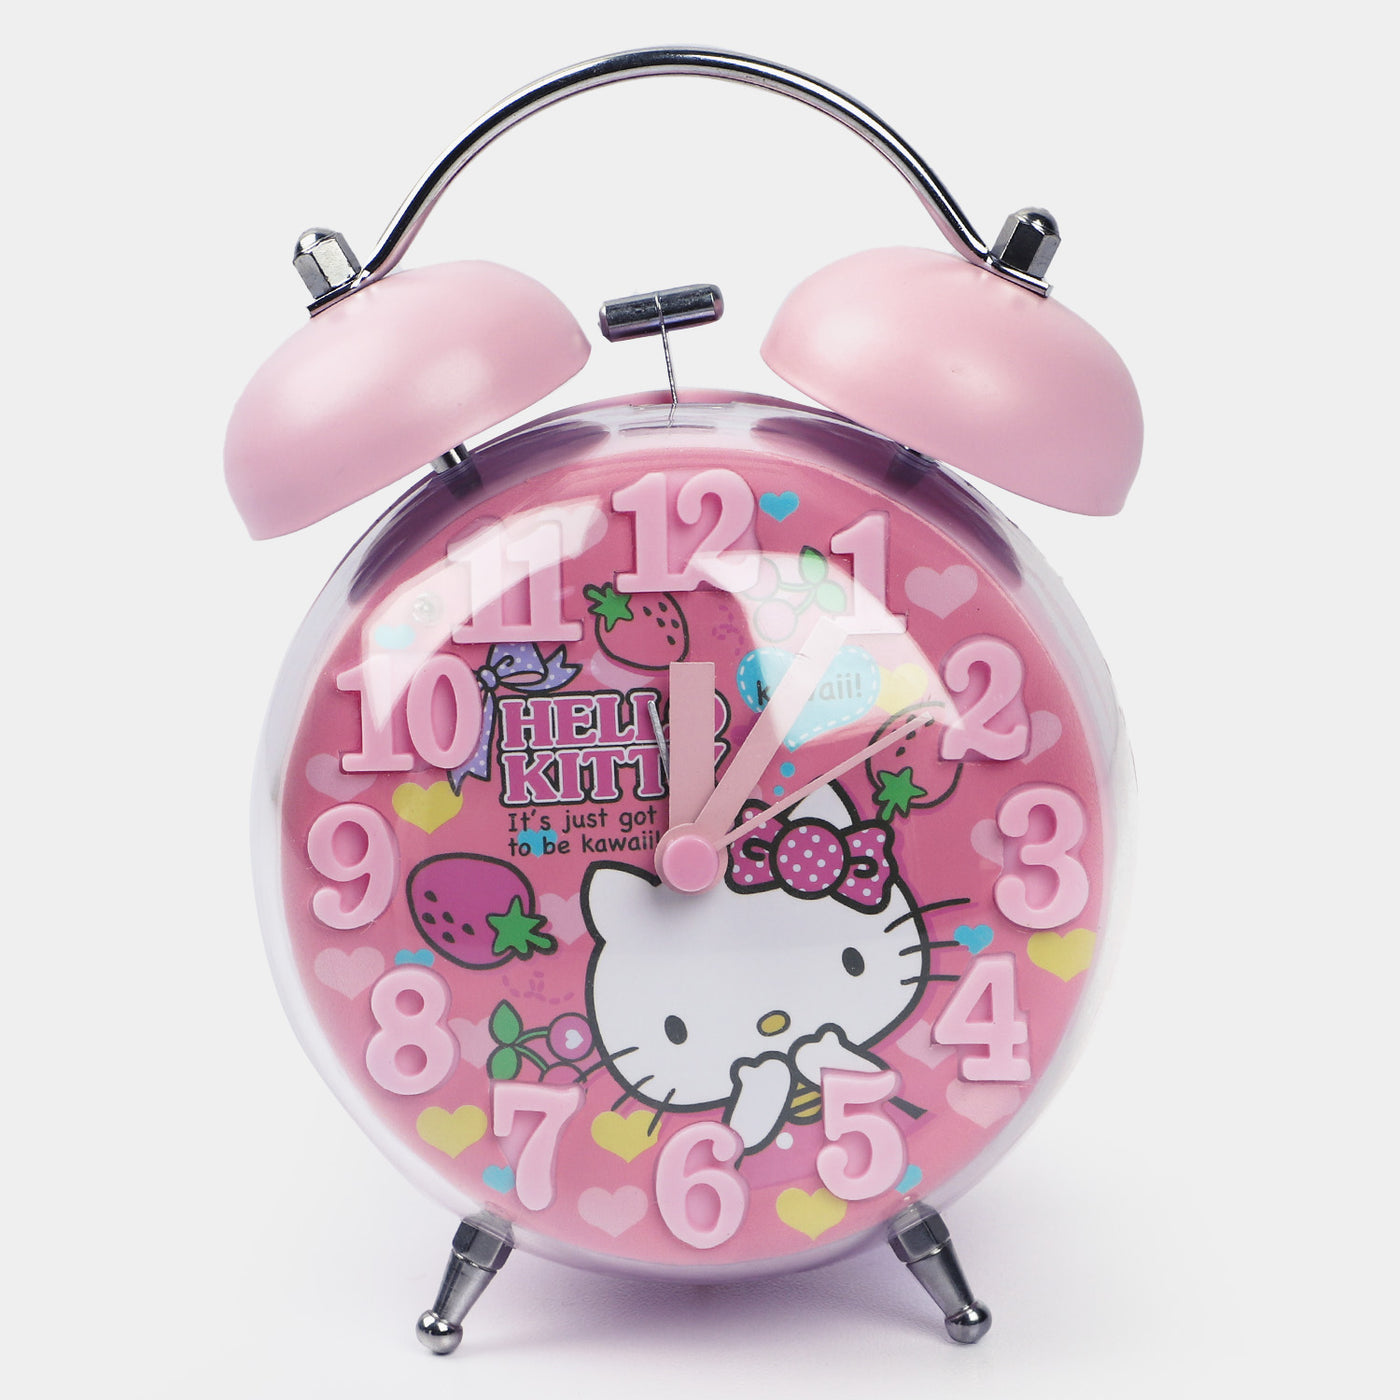 Character Alarm Table Clock For Kids